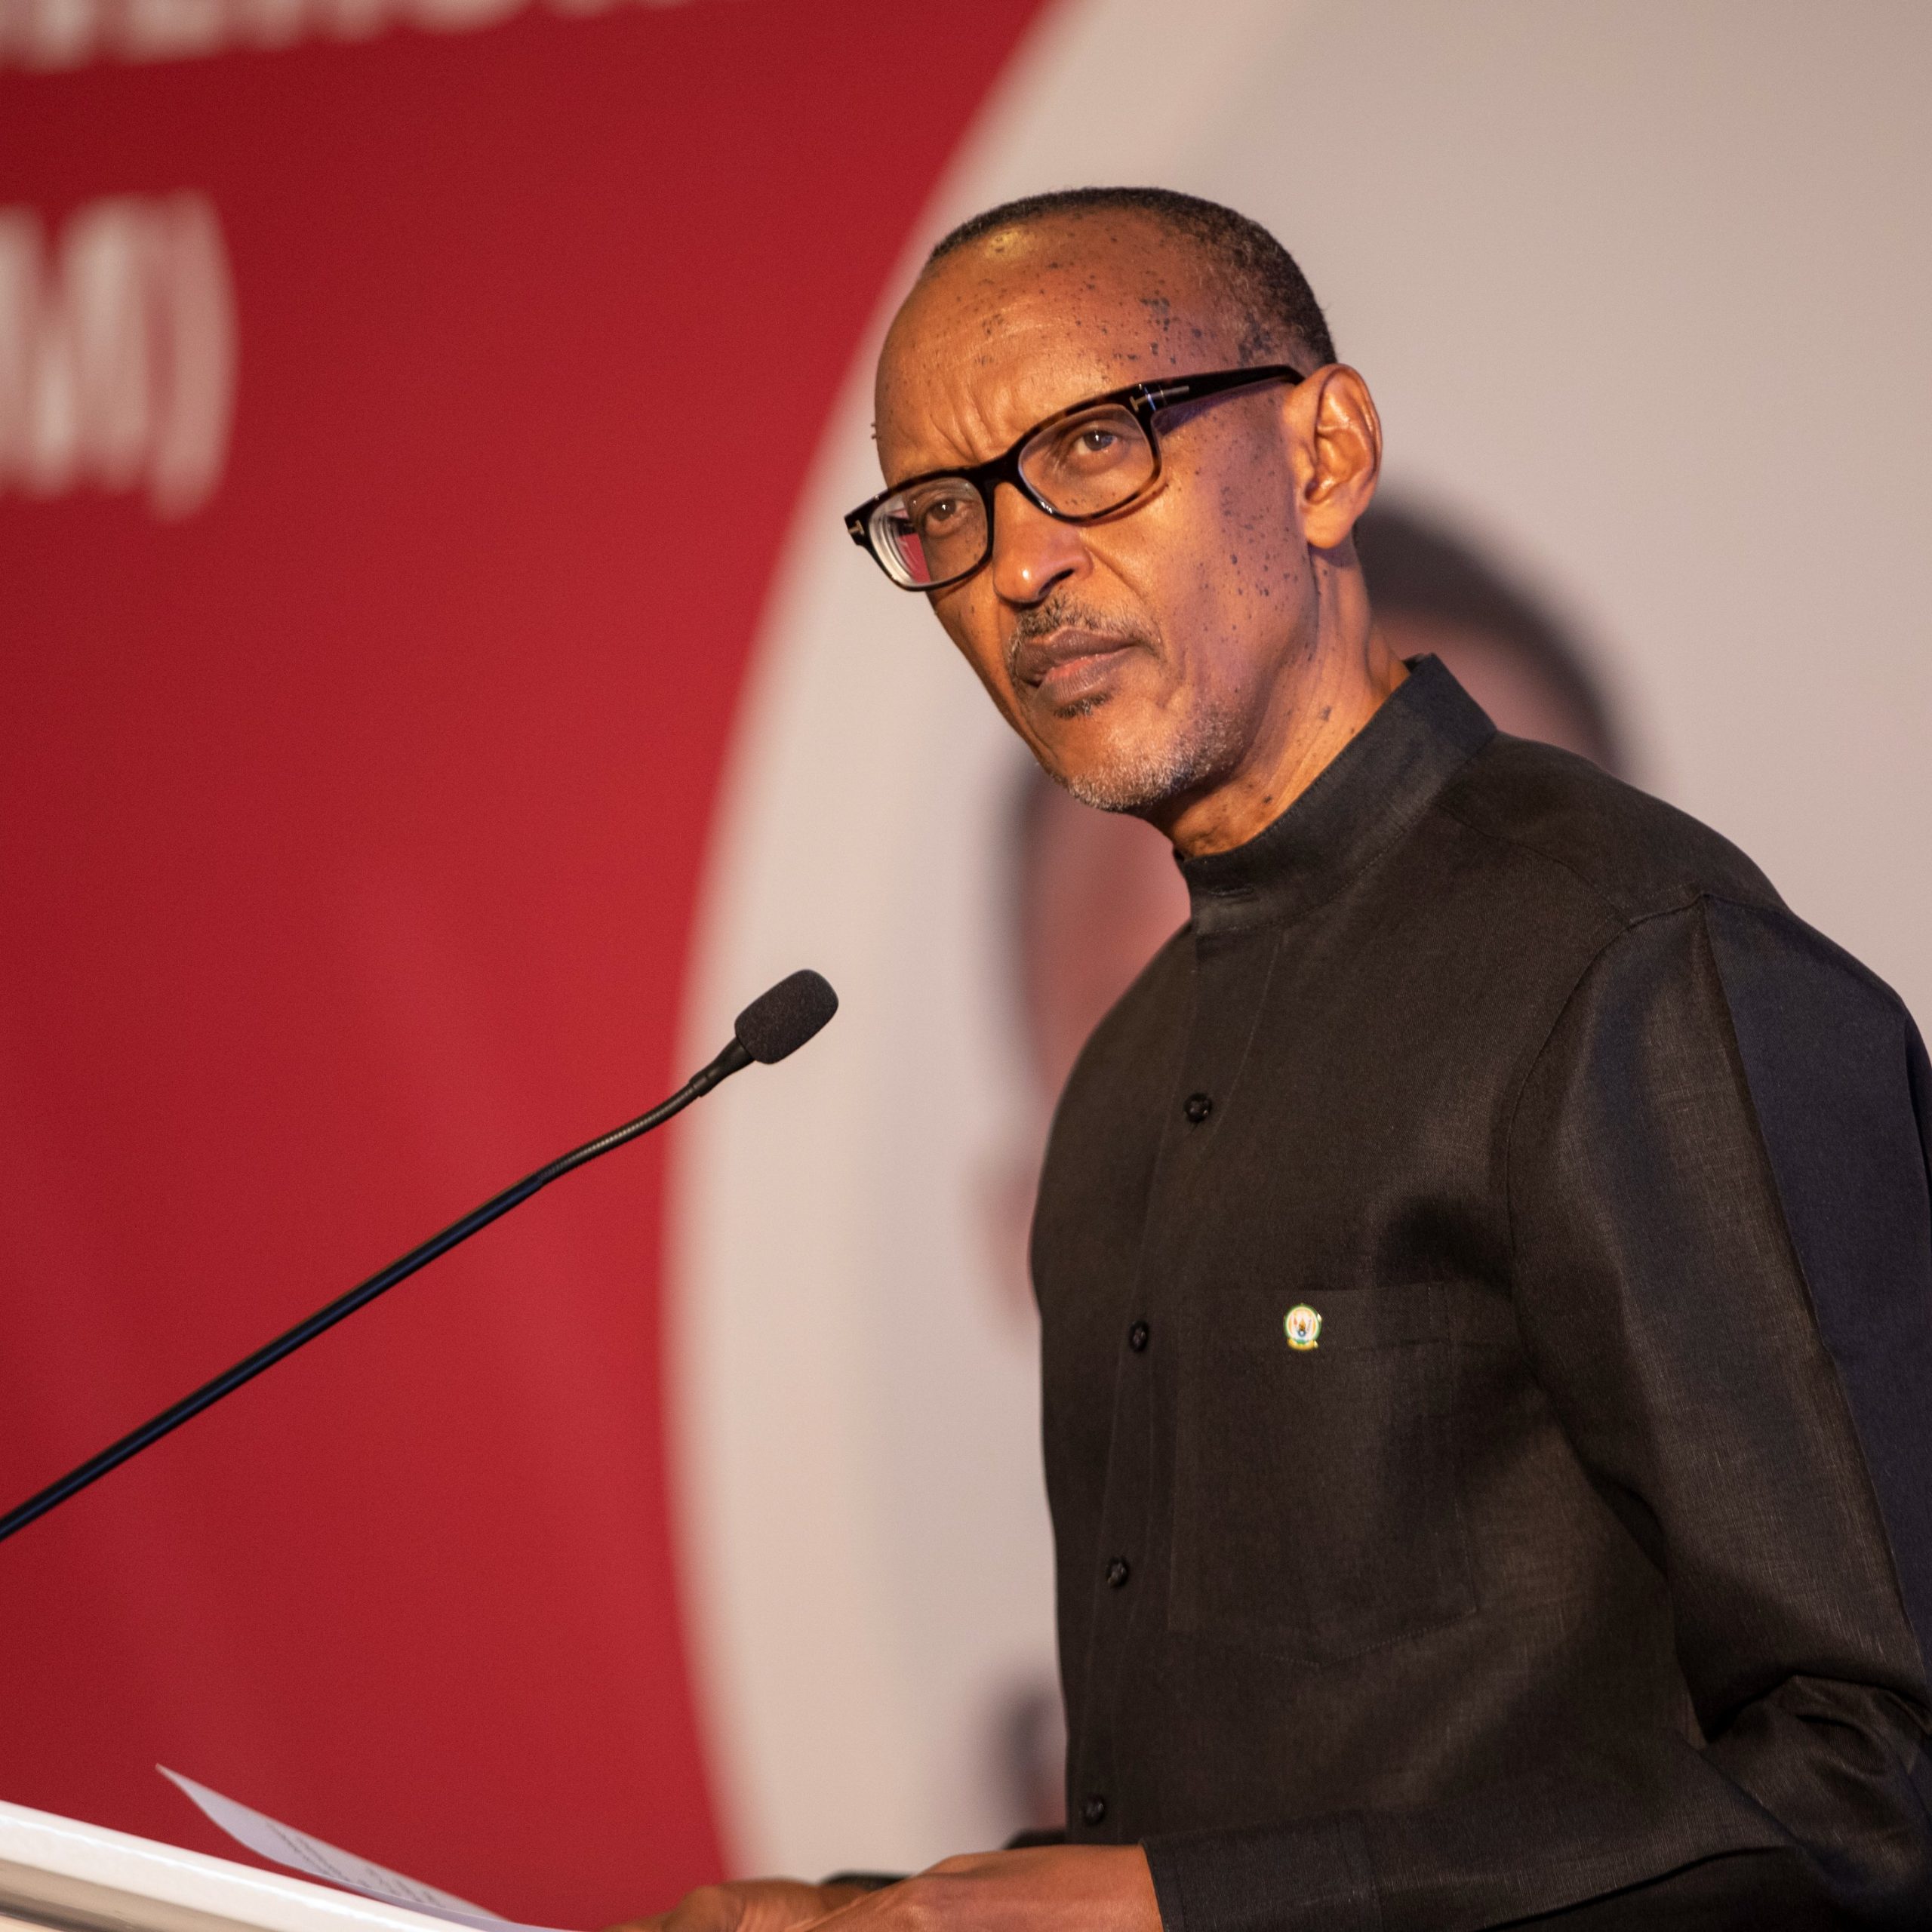 Kagame to Africa: “We Need to Be Doing Things for Ourselves”